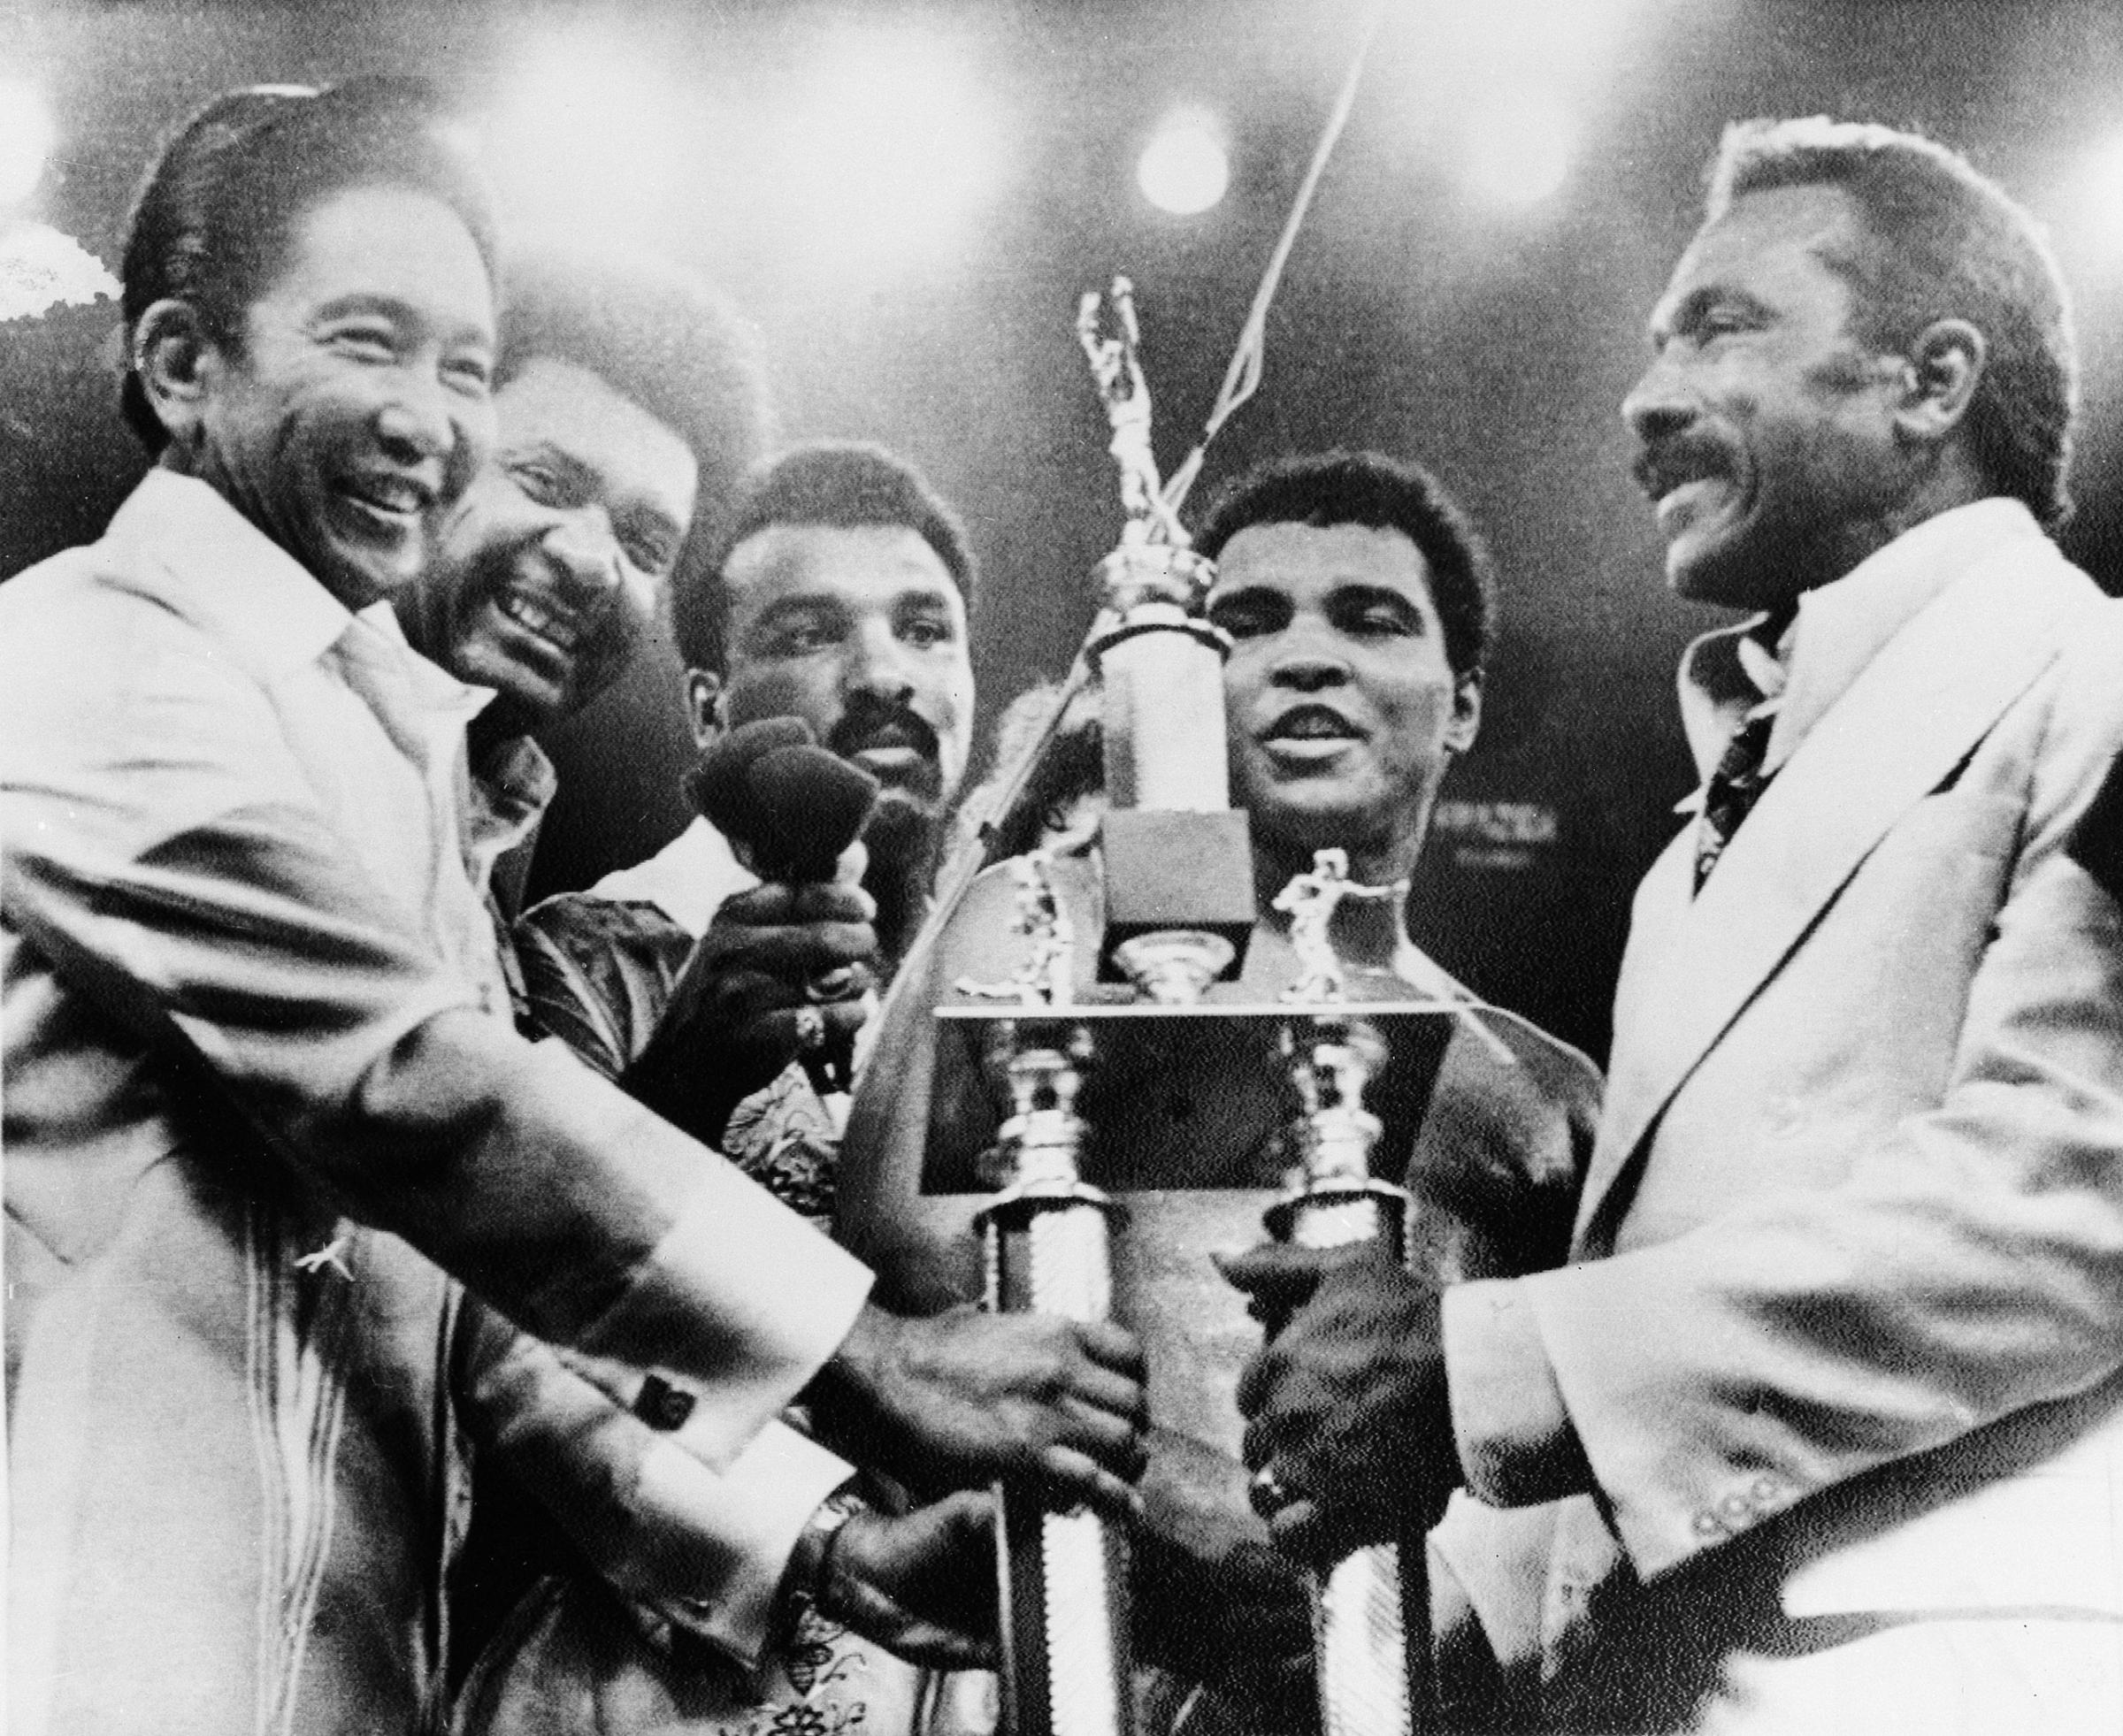 President Ferdinand Marcos, left, of the Philippines, presents the President's Trophy to heavyweight champion Muhammad Ali, second from right, after Ali defeated Joe Frazier in their "Thrilla in Manila" fight at the Coliseum in Manila, October 1, 1975. Posing from left are, President Marcos; promoter Don King; Ali's brother, Rahman; Ali, and his father Cassius Marcellus Clay Sr., right.